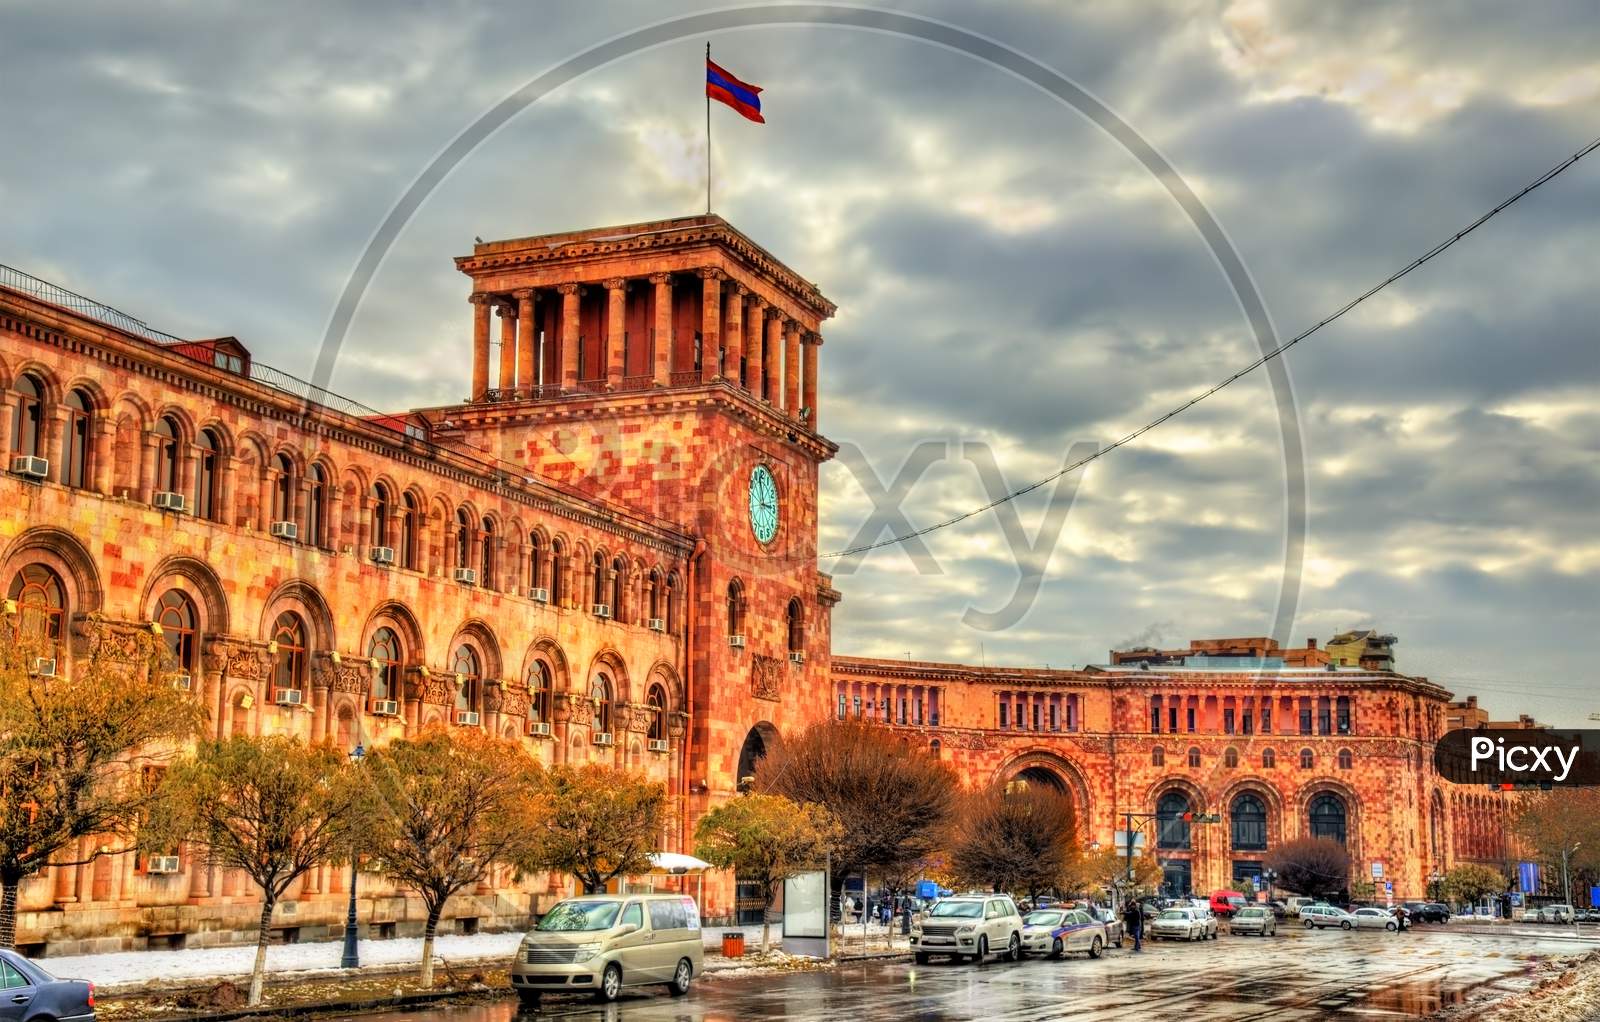 Government Building On Republic Square Of Yerevan